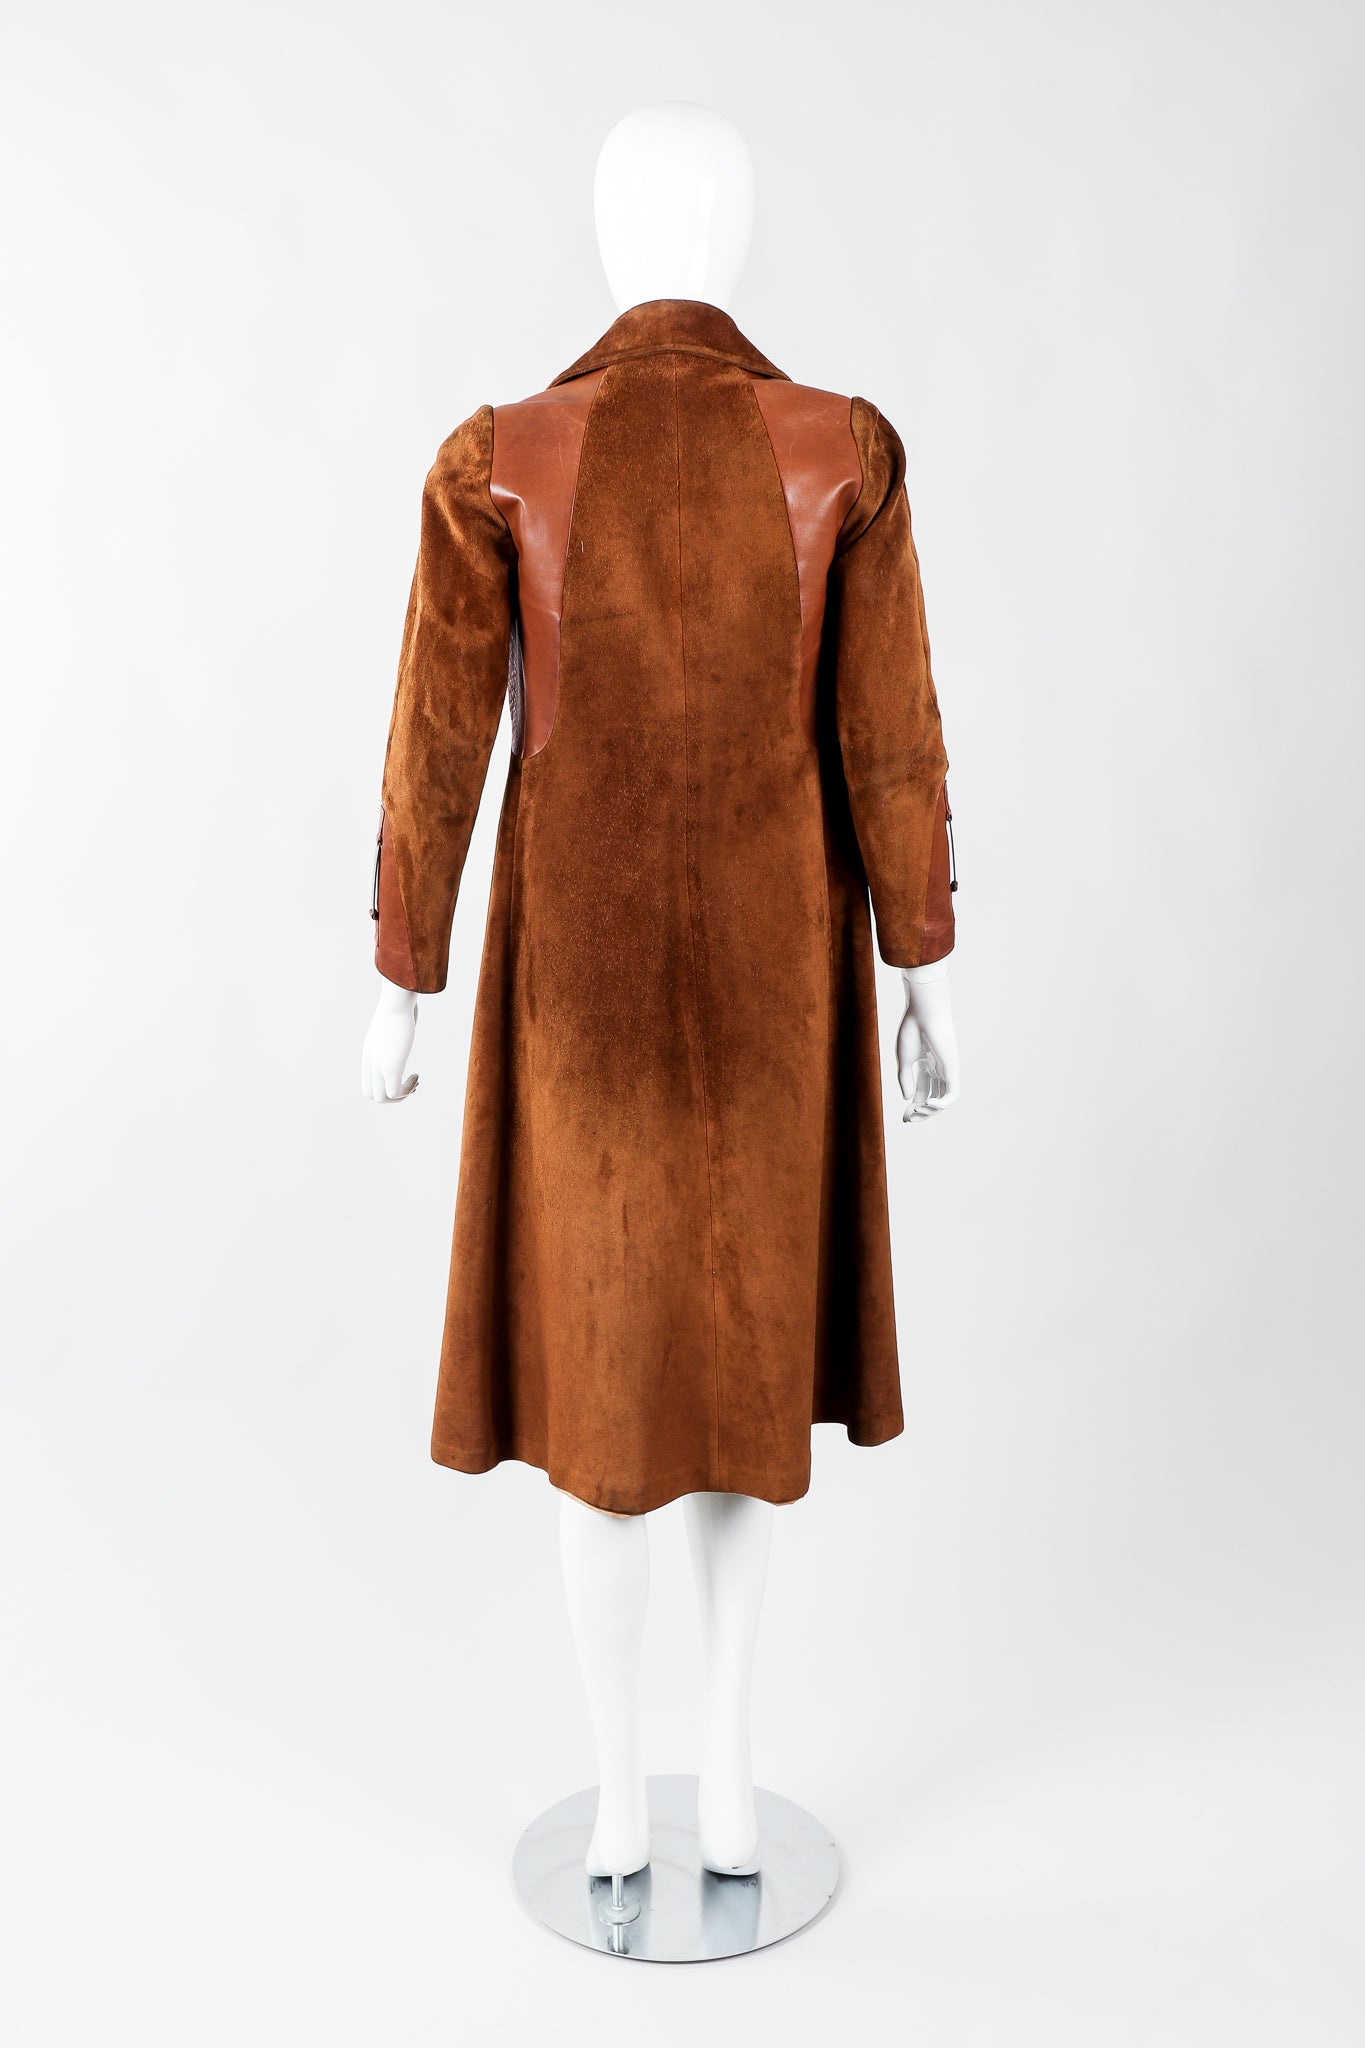 Vintage Gucci 1970s Cognac Suede Iconic Enamel Web Trench Coat on Mannequin back, at Recess